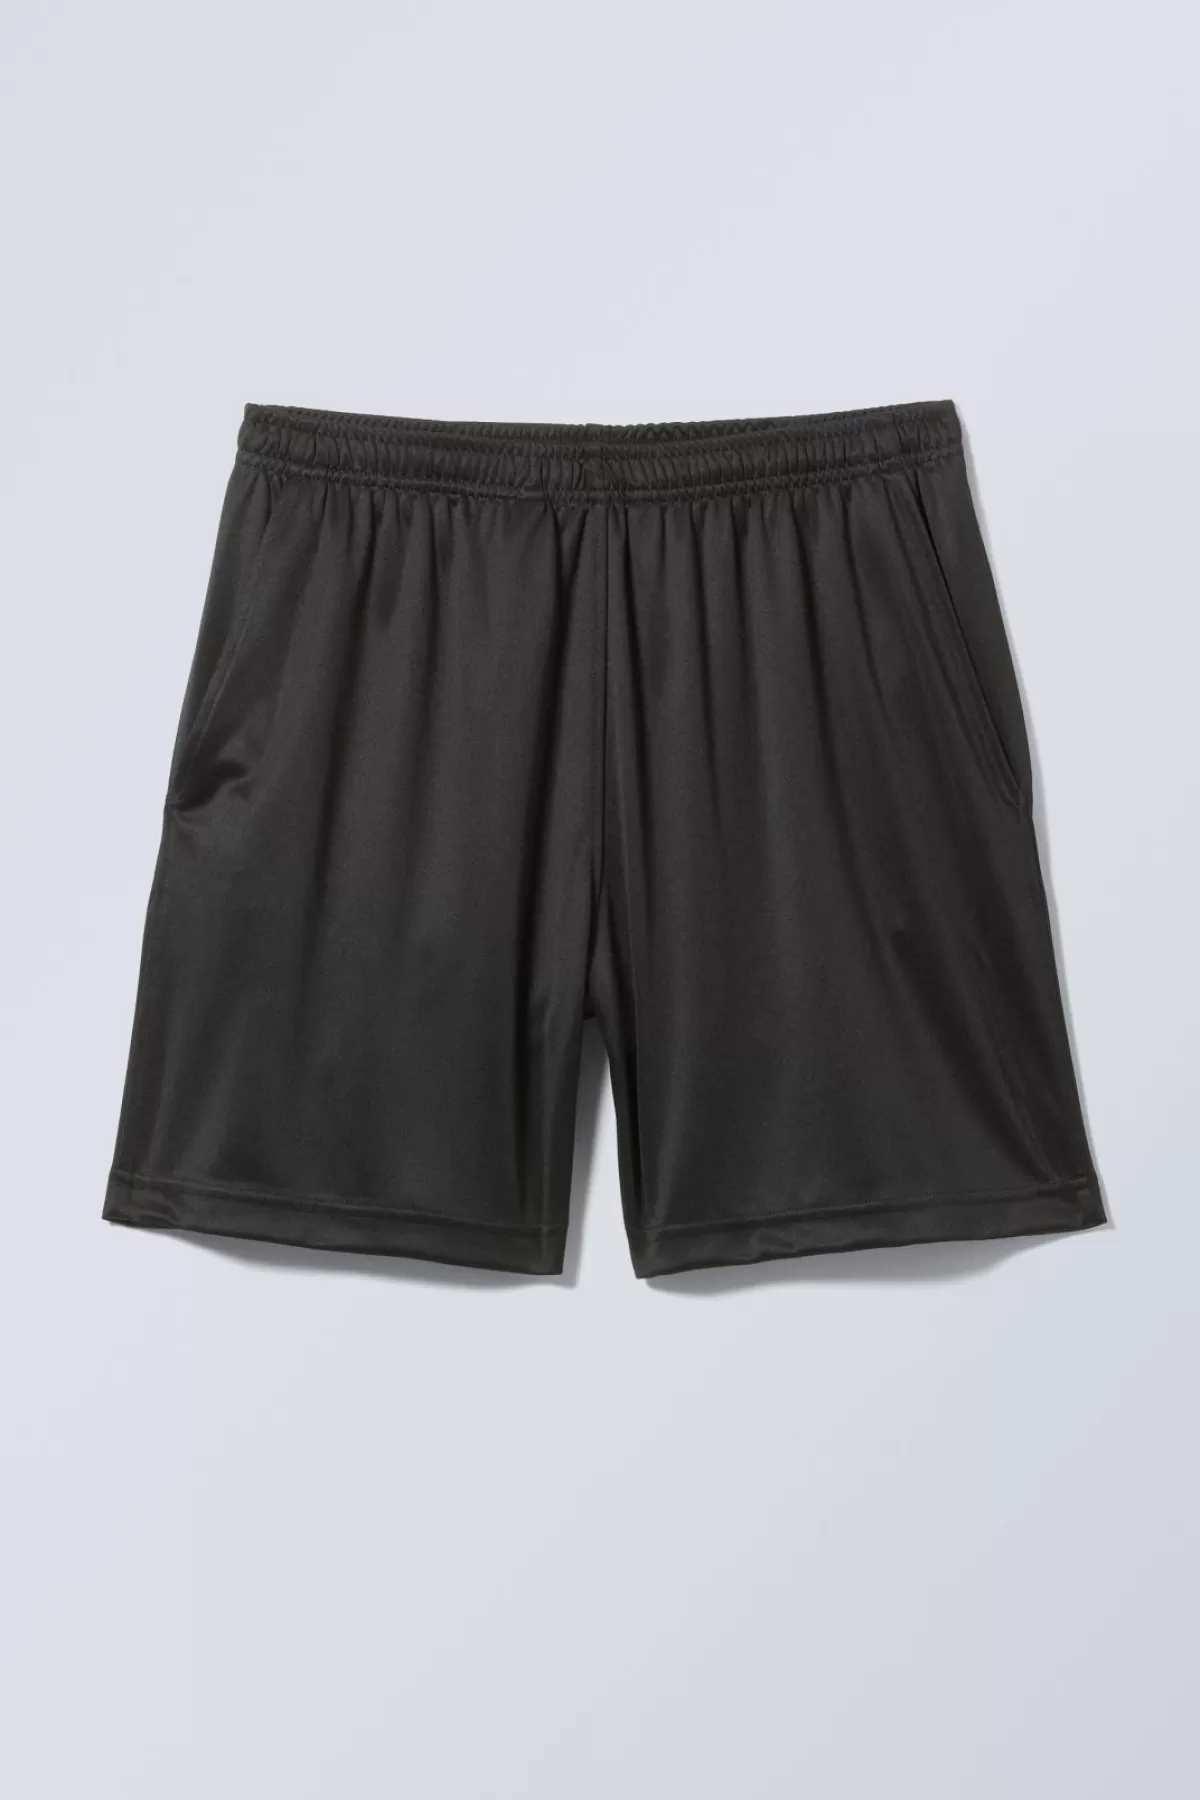 Weekday Loose Wide Track Shorts Black Discount